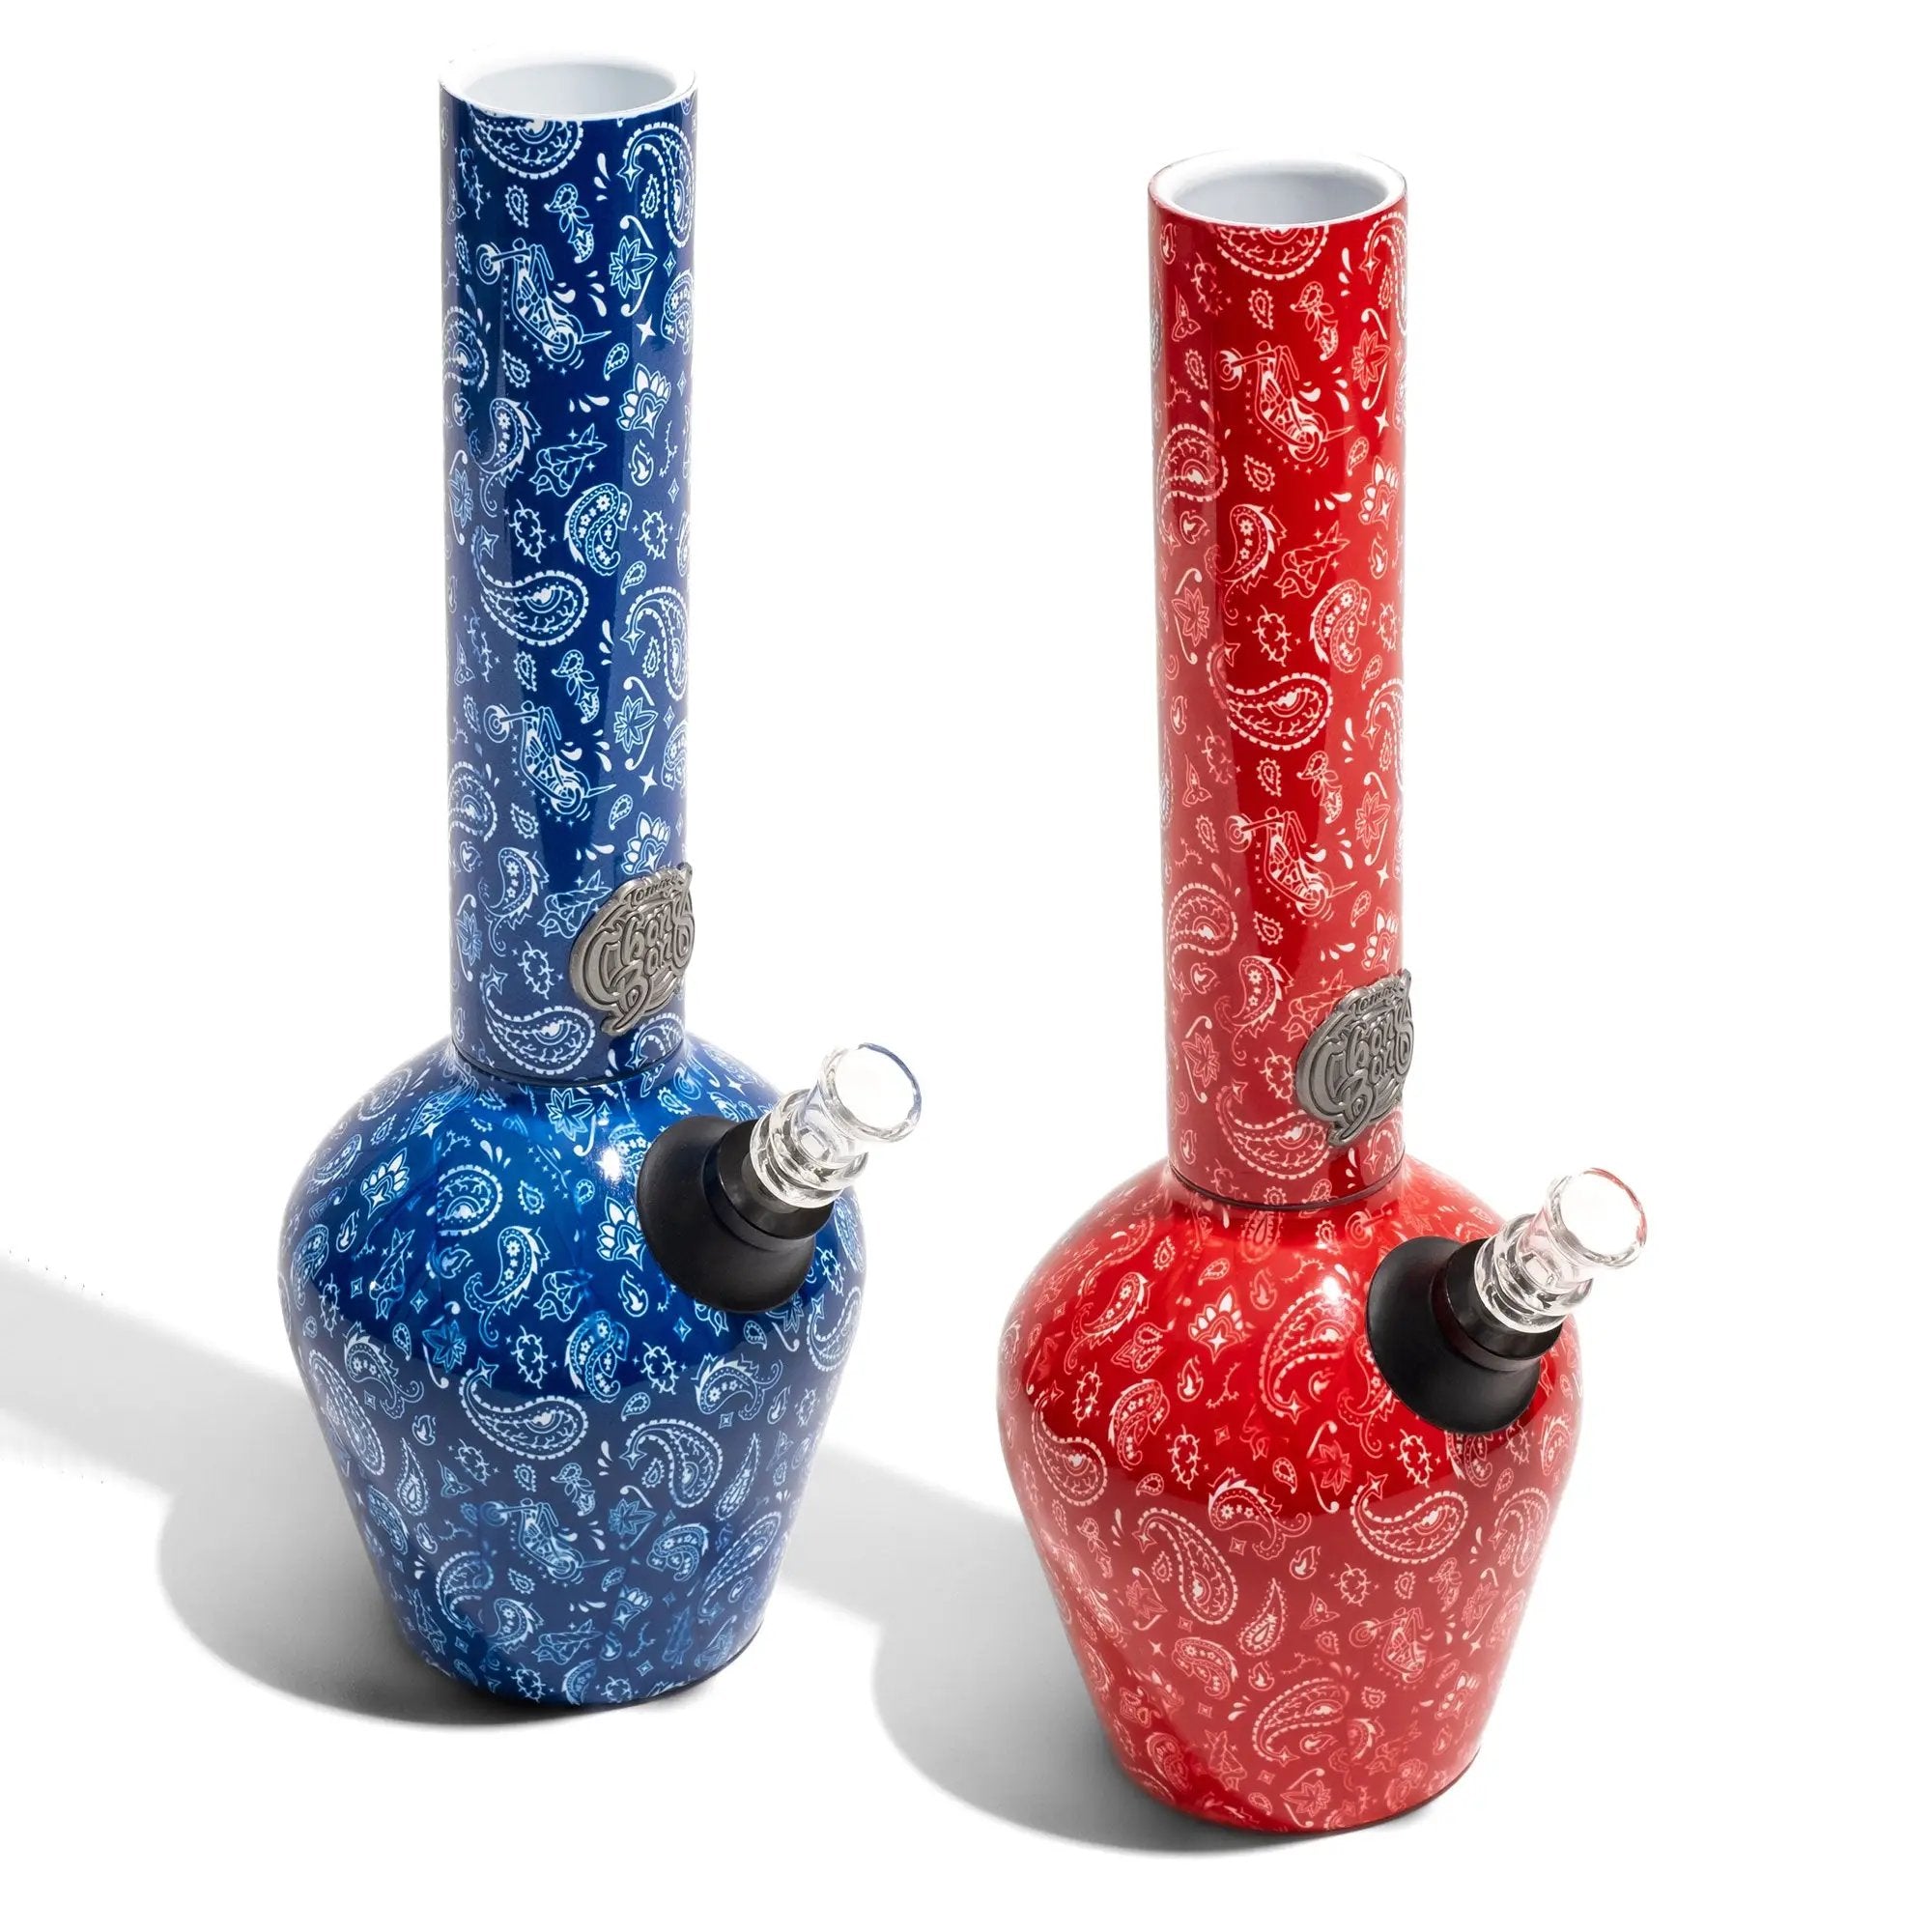 Chill - Limited Edition - Tommy Chong Chill Bong by Chill Steel Pipes